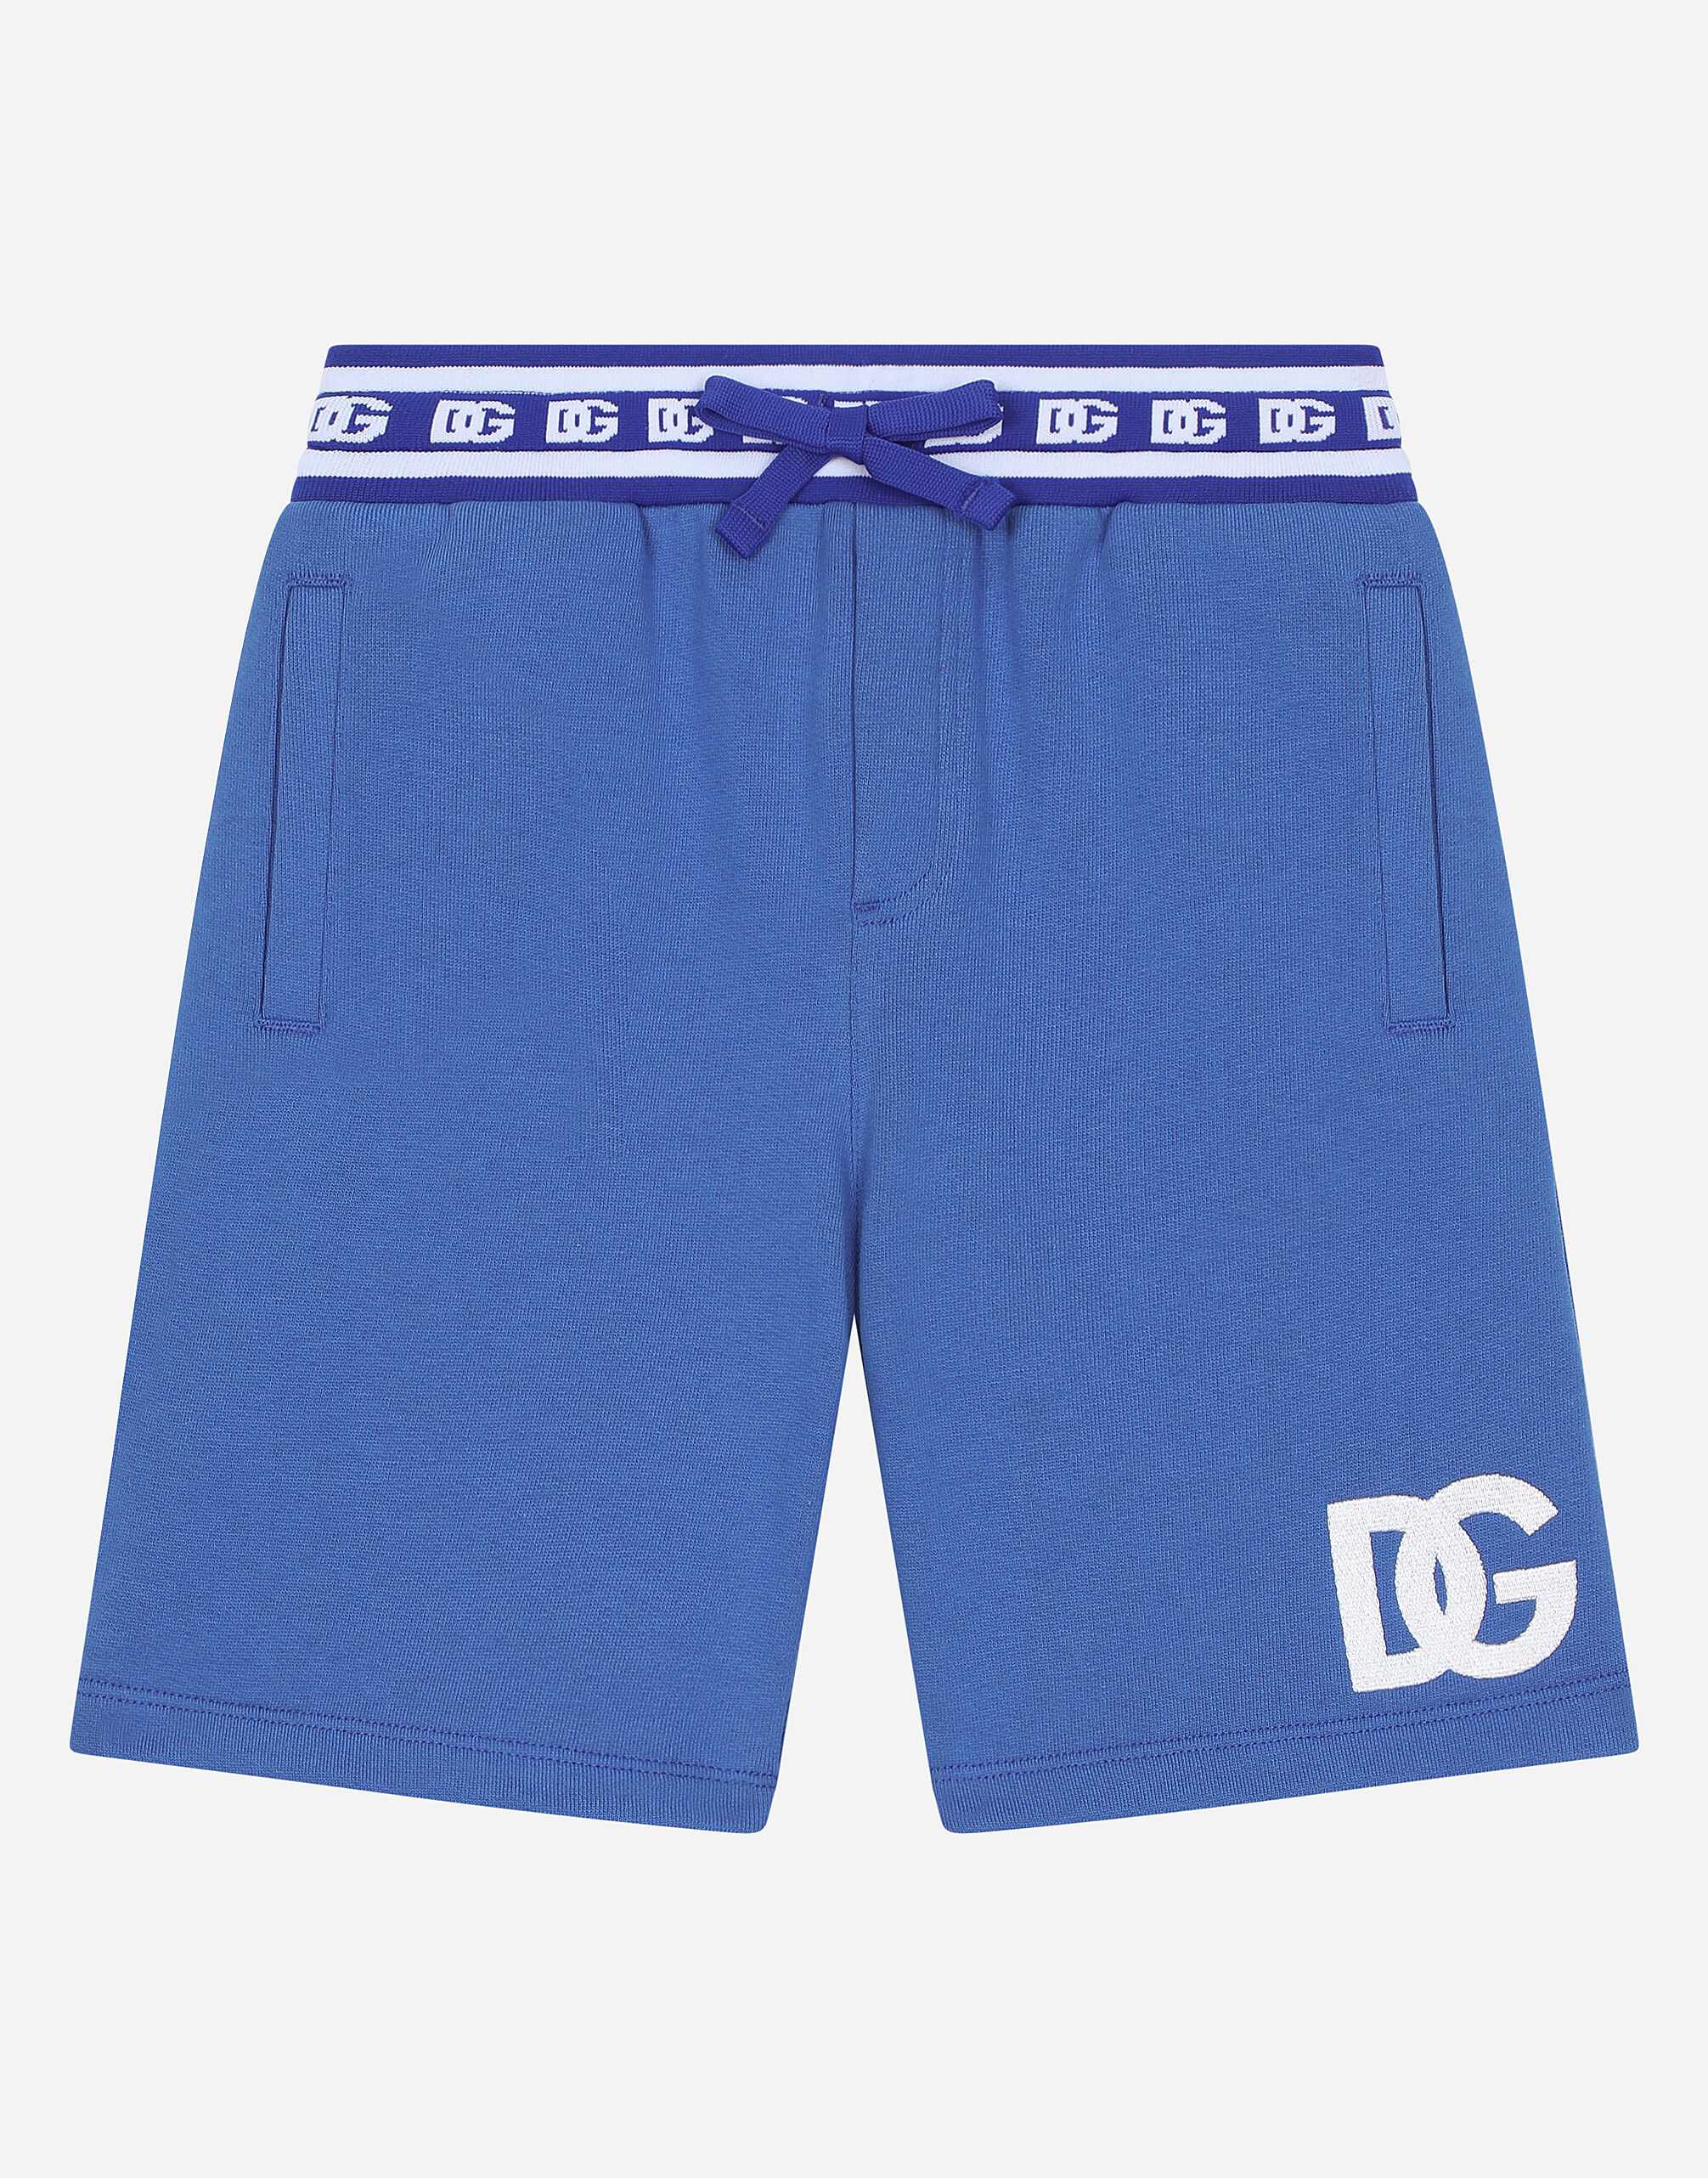 Boys' Pants and Shorts | Luxury clothing for kids | DG®